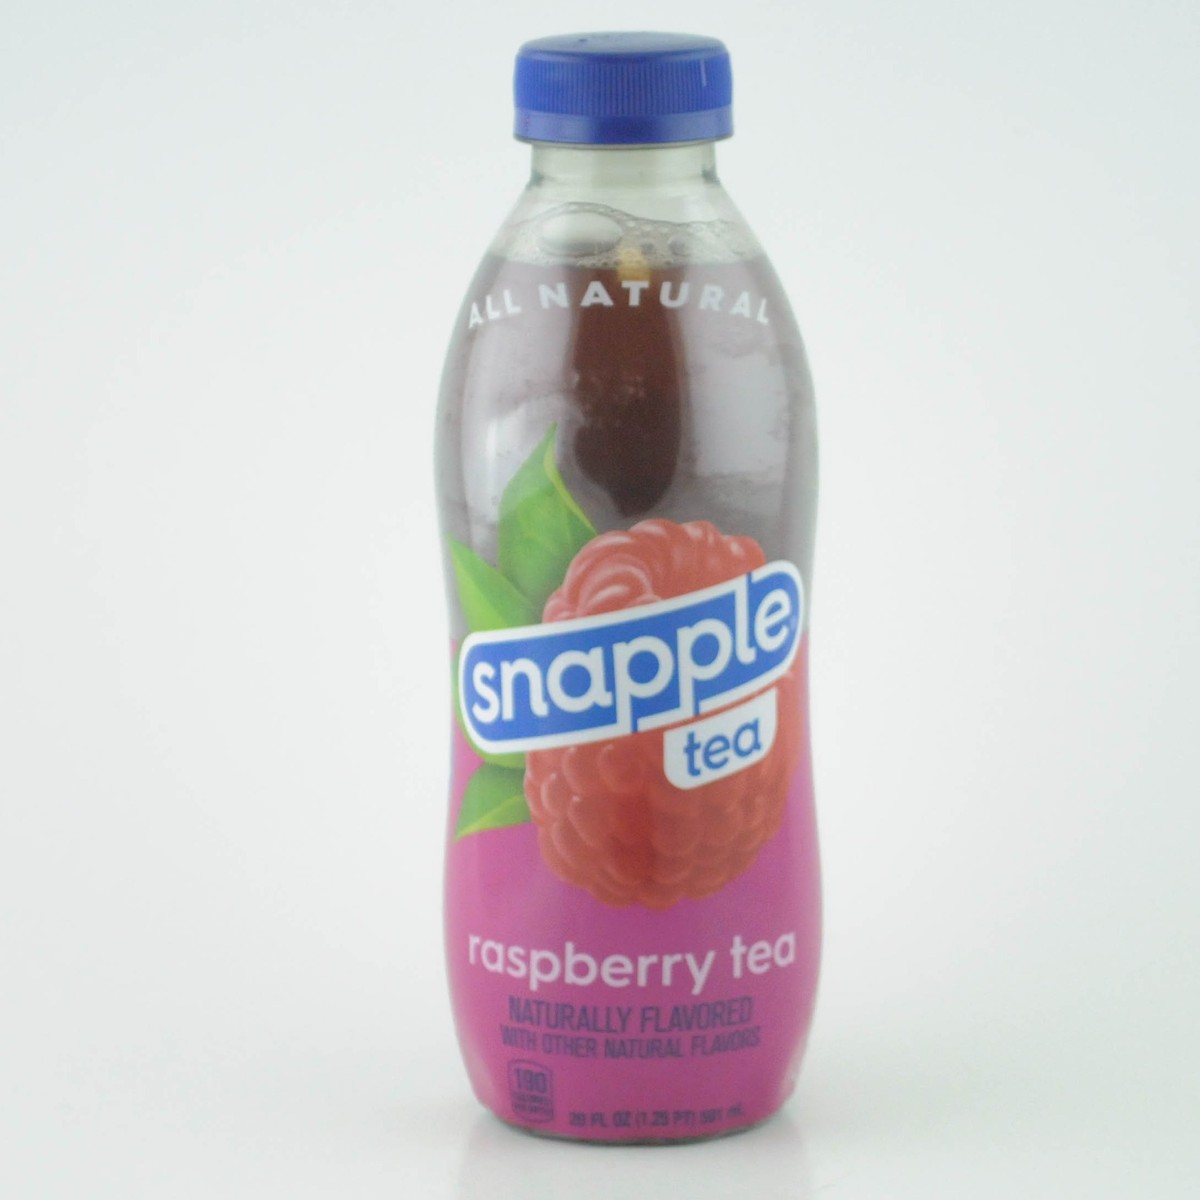 Snapple All Natural Peach Iced Tea (16 oz x 6 ct) Delivery - DoorDash